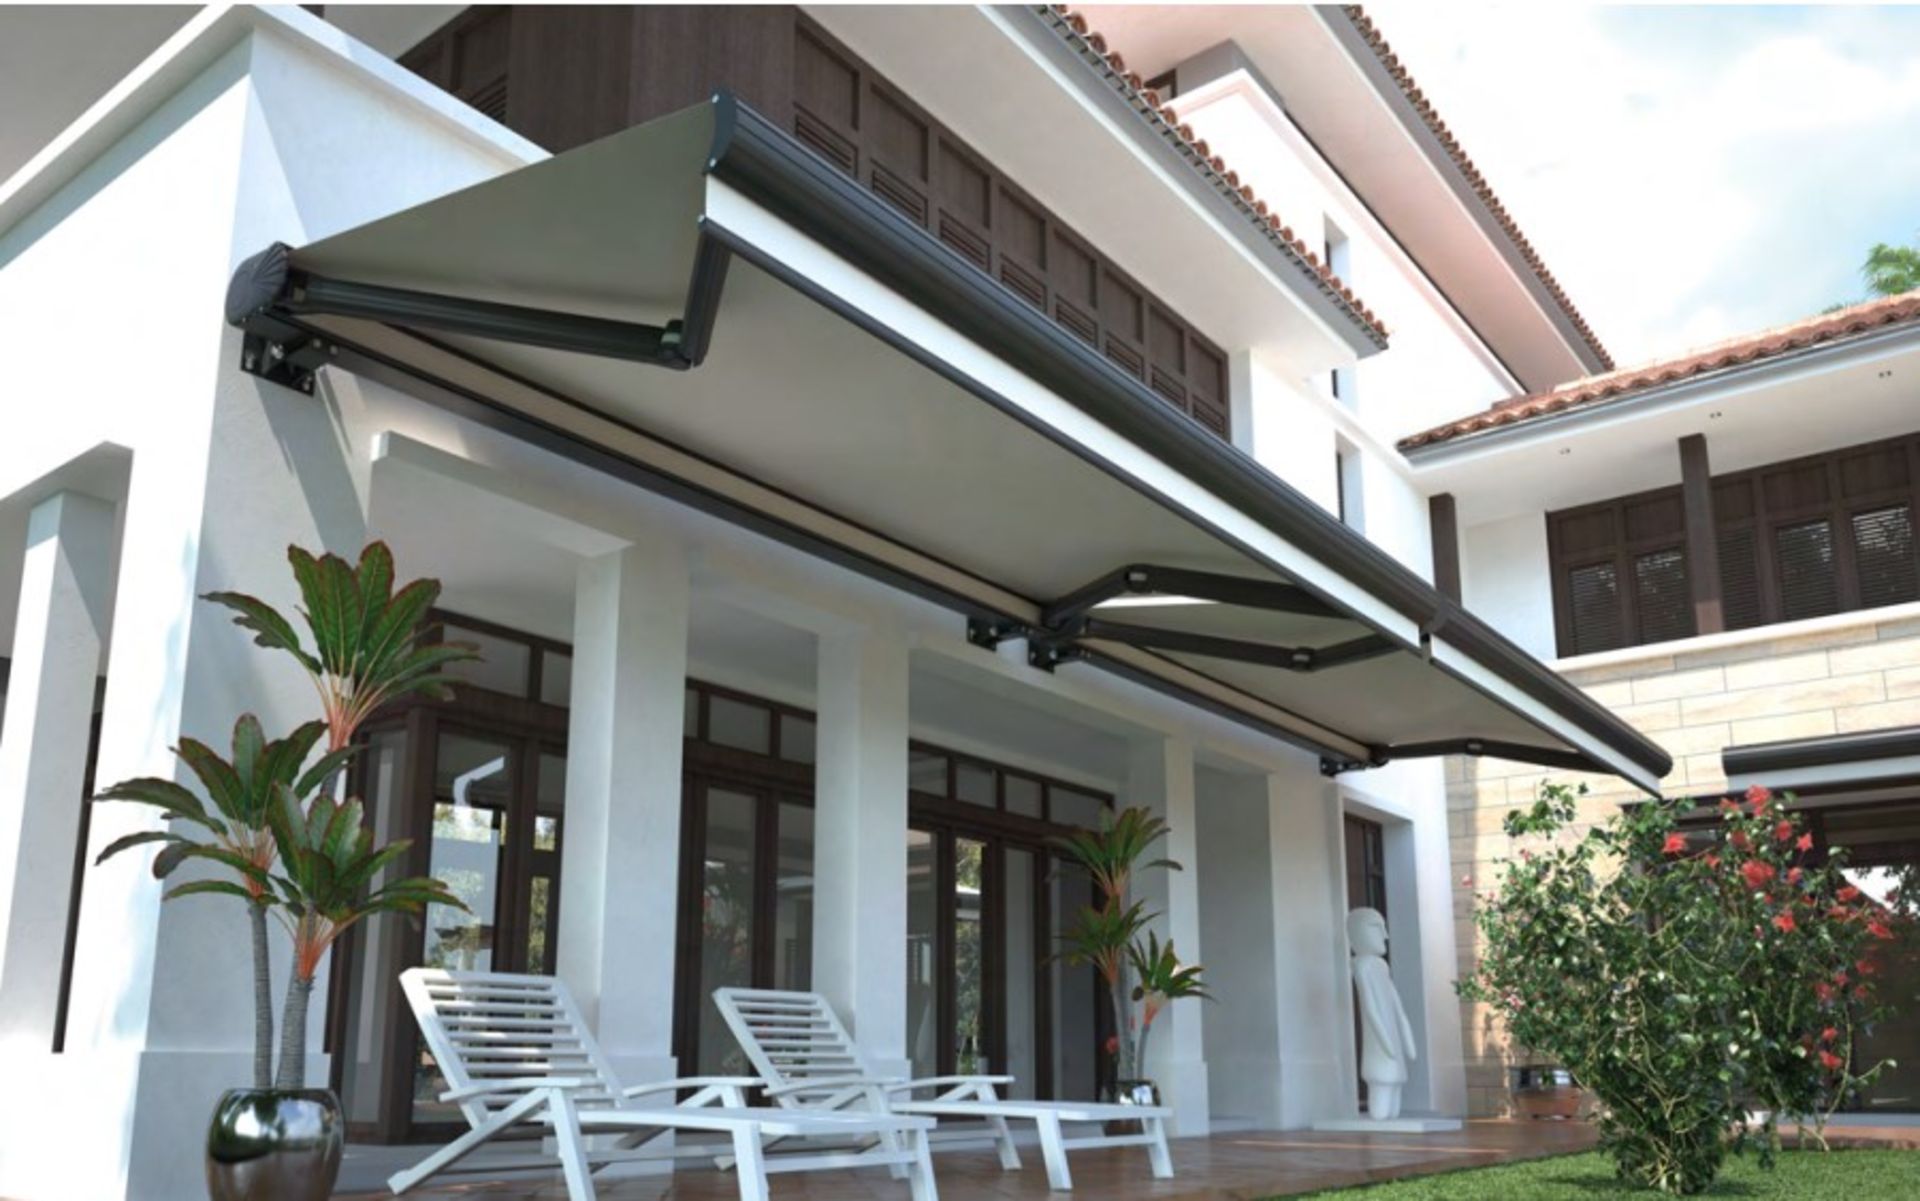 New Orion˜ fully electric Cassette Awning with remote control | 6m width and 3.5 mtr projection,